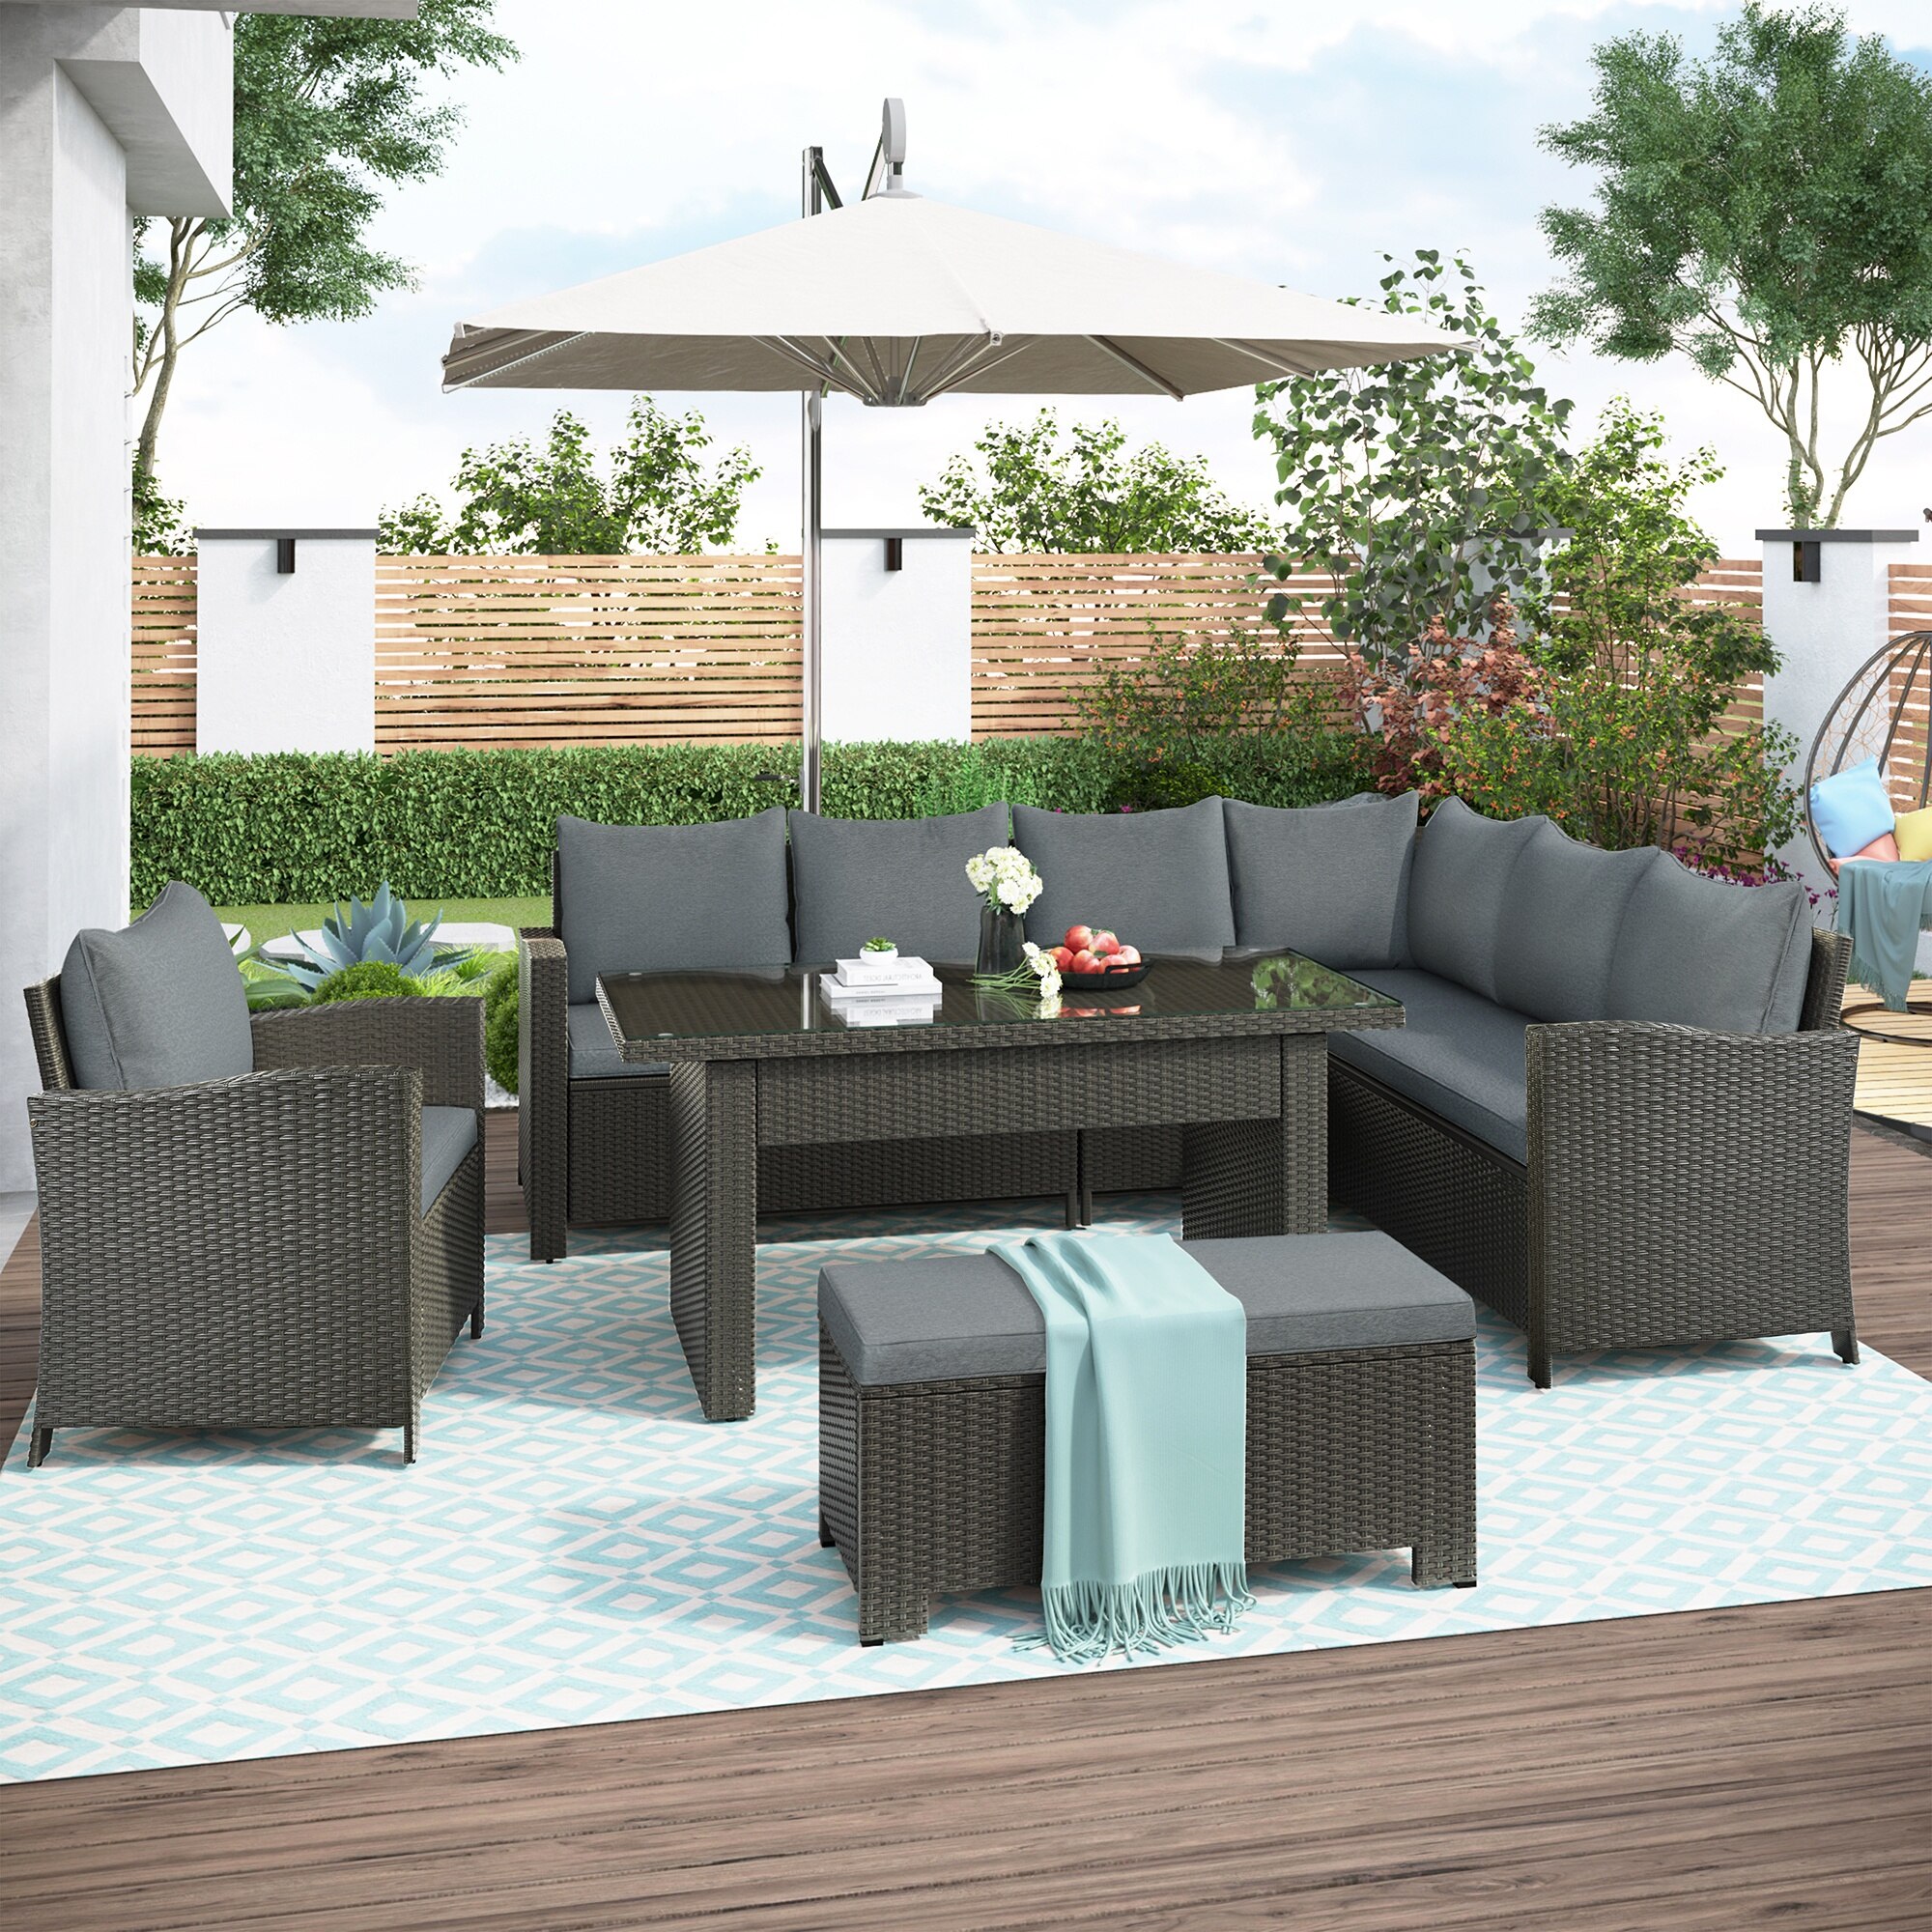 Outdoor Furniture Garden SofasPatio Furniture Set 6 Piece Outdoor Conversation Set Dining Table Chair With Bench And Cushions